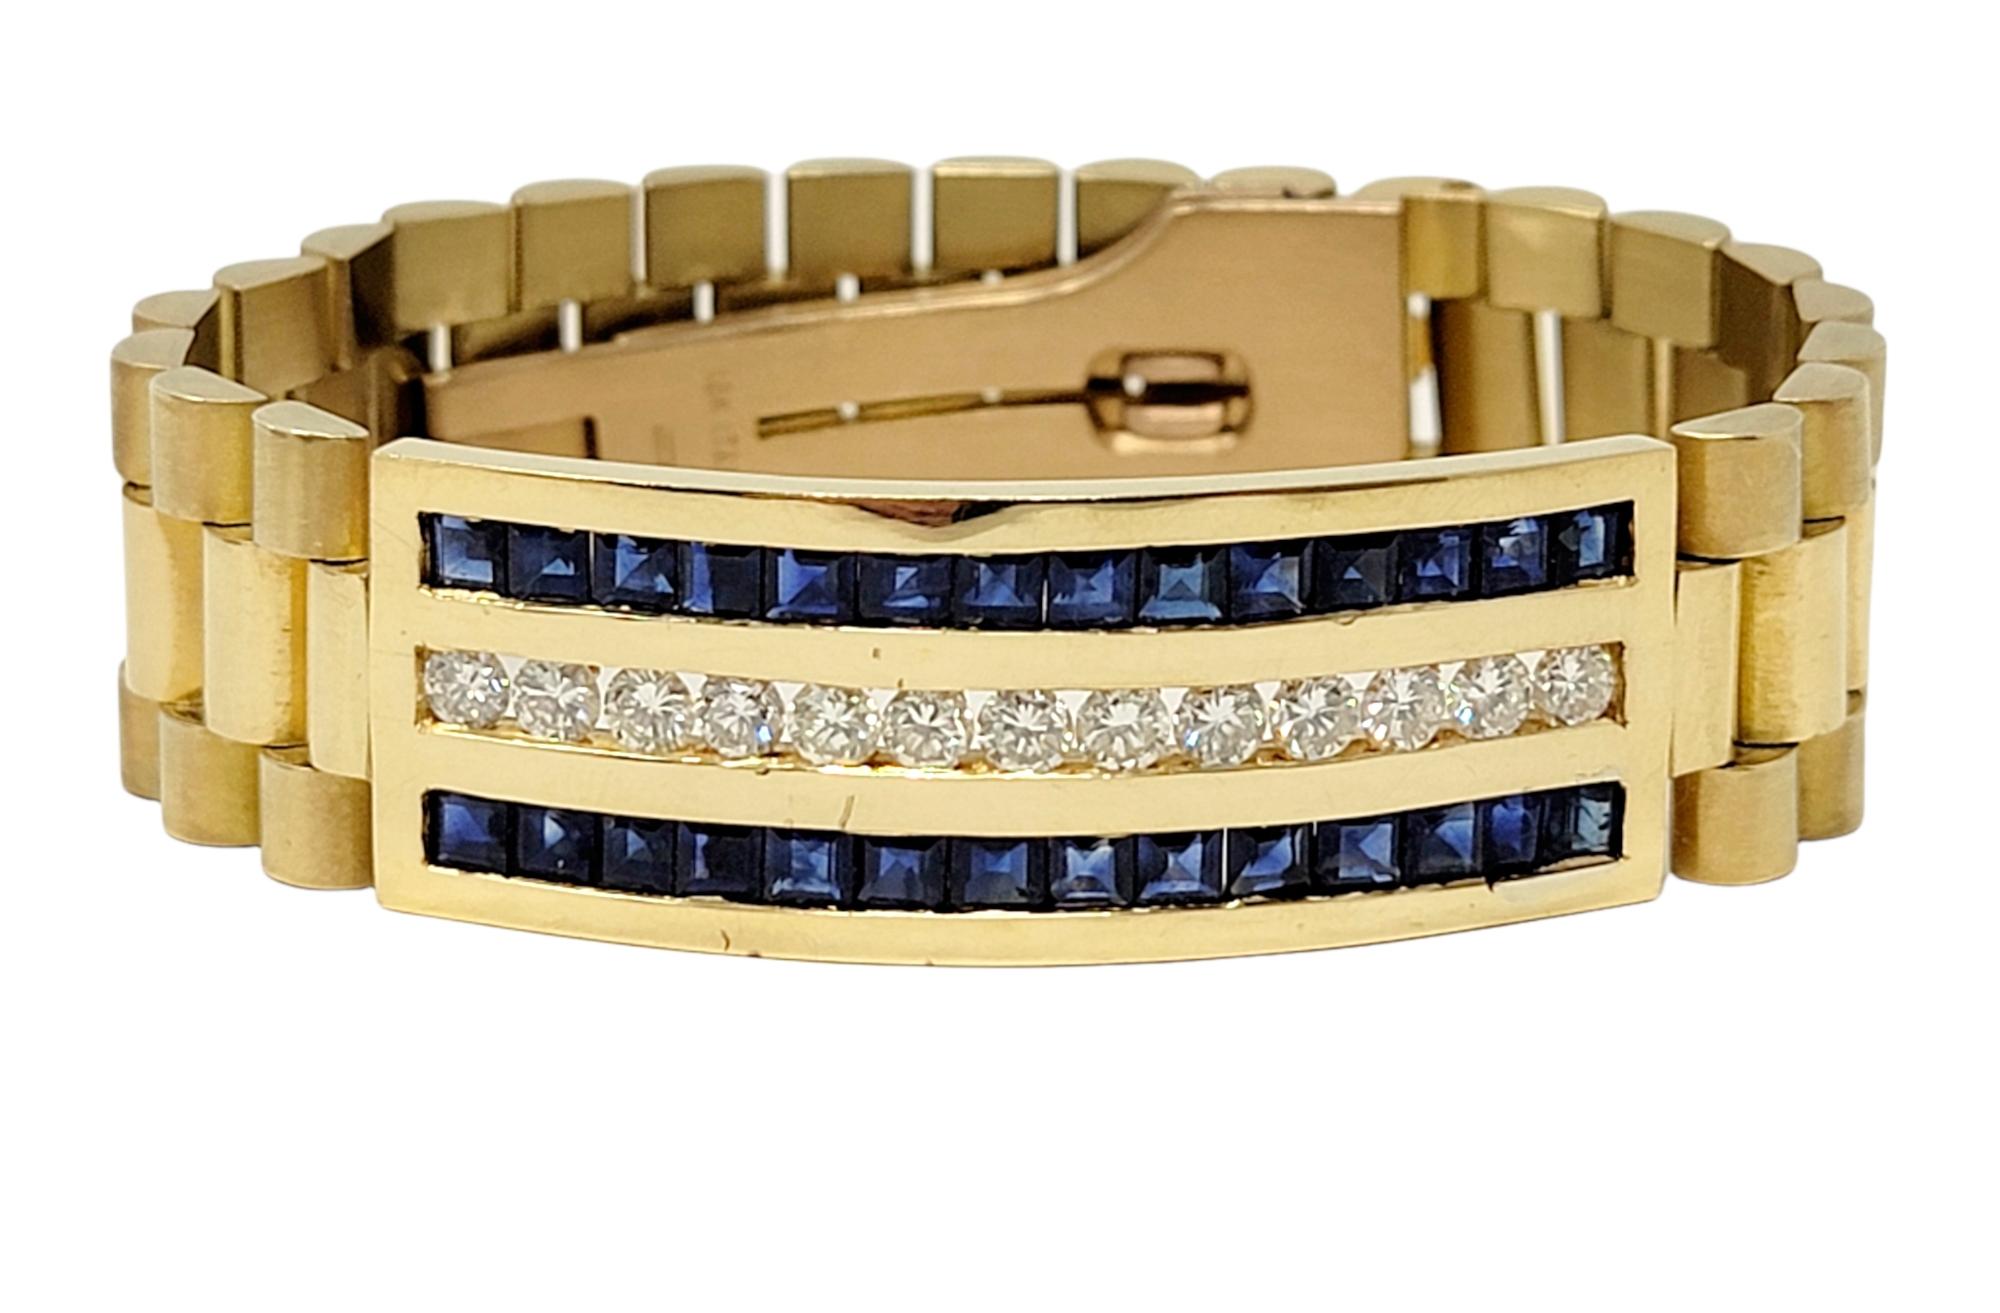 This eye-catching mens diamond and sapphire 18 karat yellow gold watch link bracelet makes a bold and luxurious statement. The contemporary design of this impressive piece looks handsome on the wrist, really drawing the viewers attention to the